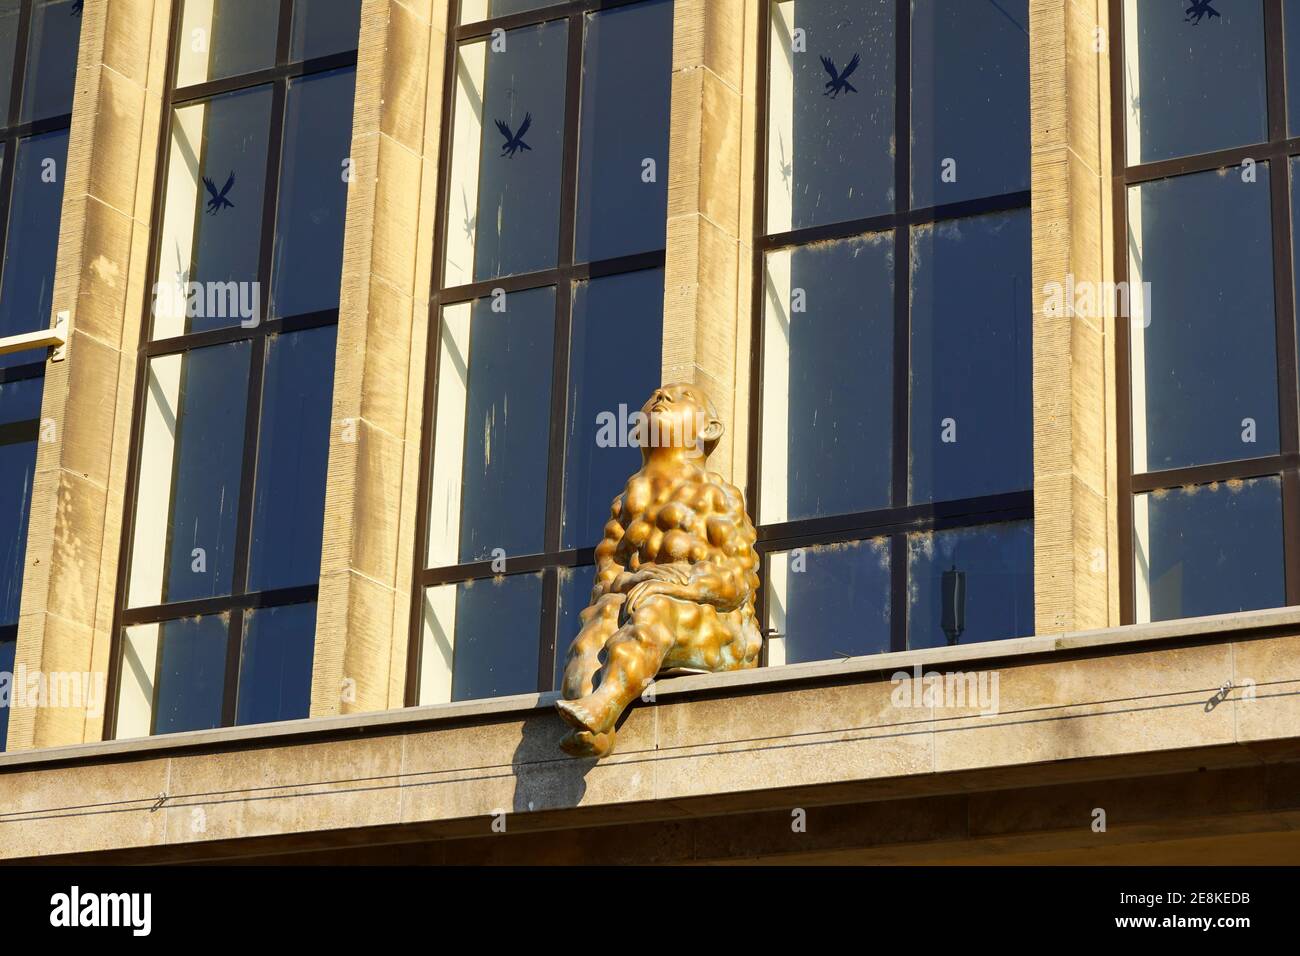 The bronze sculpture 'Beulenmann' (bump man), sitting in front of a window of the Main Station building in Düsseldorf. Artwork by Paloma Varga Weisz. Stock Photo